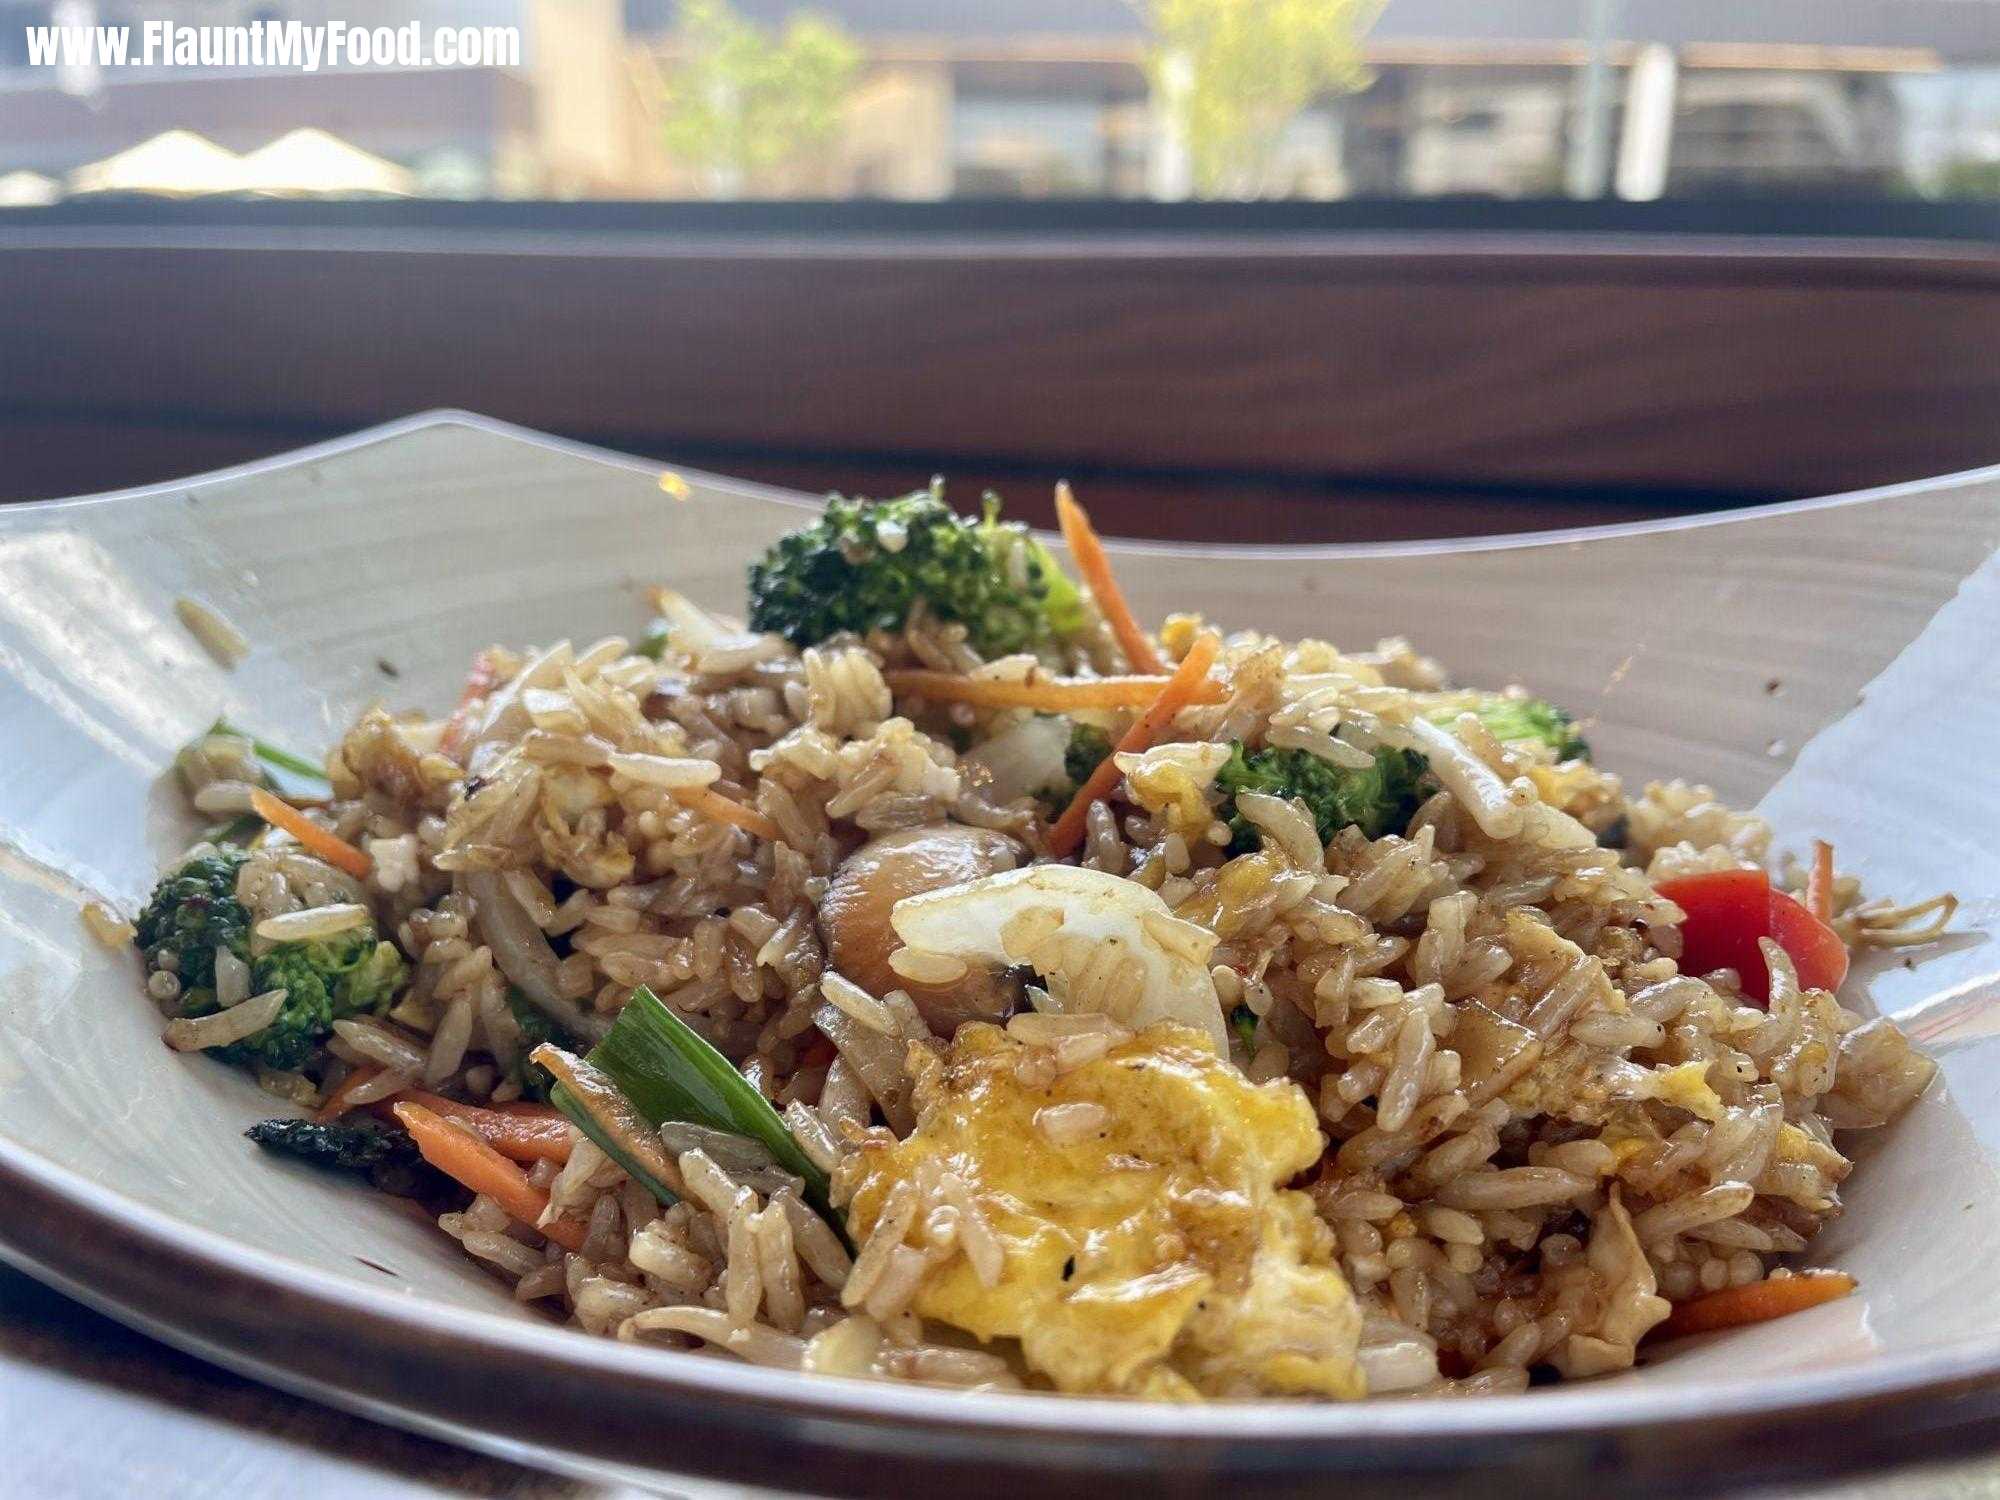 Fried Rice at Malai Kitchen in the shops at clear fork, Fort Worth TexasExperience the unique flavors of Malai Kitchen's Fried Rice dish in the heart of the Shops at Clear Fork, Fort Worth, Texas. Our expertly crafted fried rice dish is made with fresh ingredients and flavorful spices to create a taste that's sure to delight your senses. Whether you're in the mood for our classic fried rice or our spicy version with chilies and Thai basil, Malai Kitchen has got you covered. Our Asian fusion cuisine showcases the best of Thai, Vietnamese, and Chinese flavors, and is the perfect way to satisfy your cravings for bold and exotic dishes. Come and enjoy the warm and inviting atmosphere of our Clear Fork location, where you can indulge in some of the best Asian cuisine in Fort Worth. Book your table today and experience the unique flavors of Malai Kitchen's Fried Rice dish!